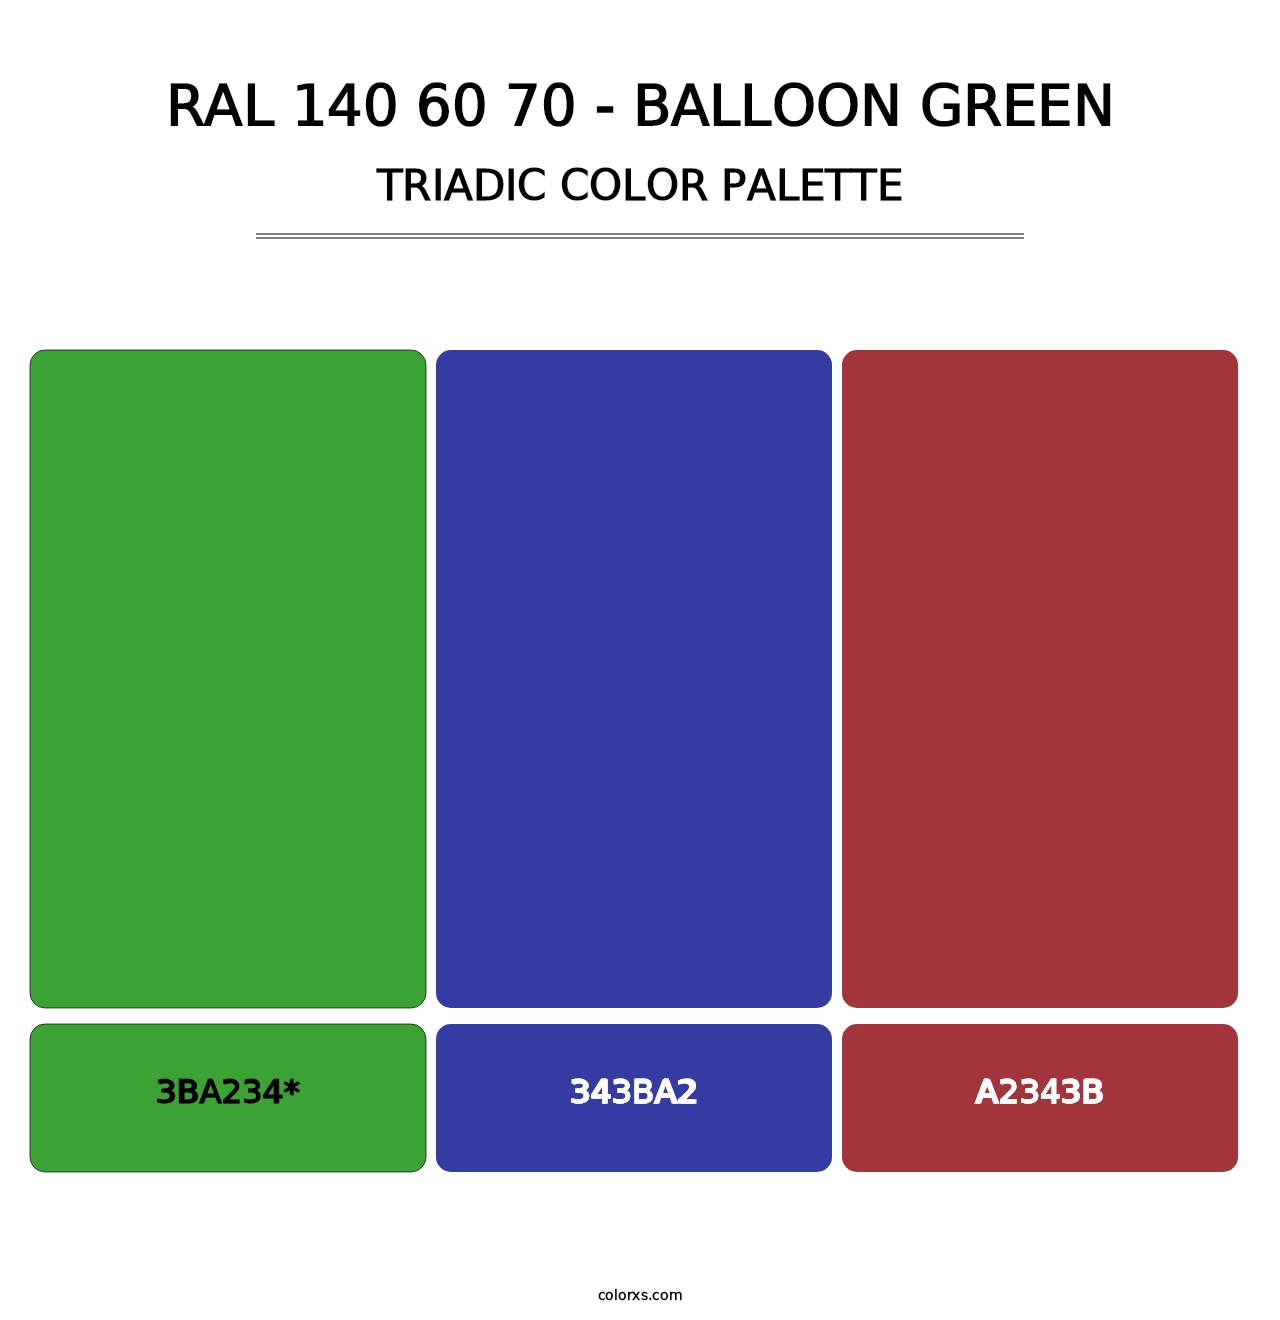 RAL 140 60 70 - Balloon Green - Triadic Color Palette